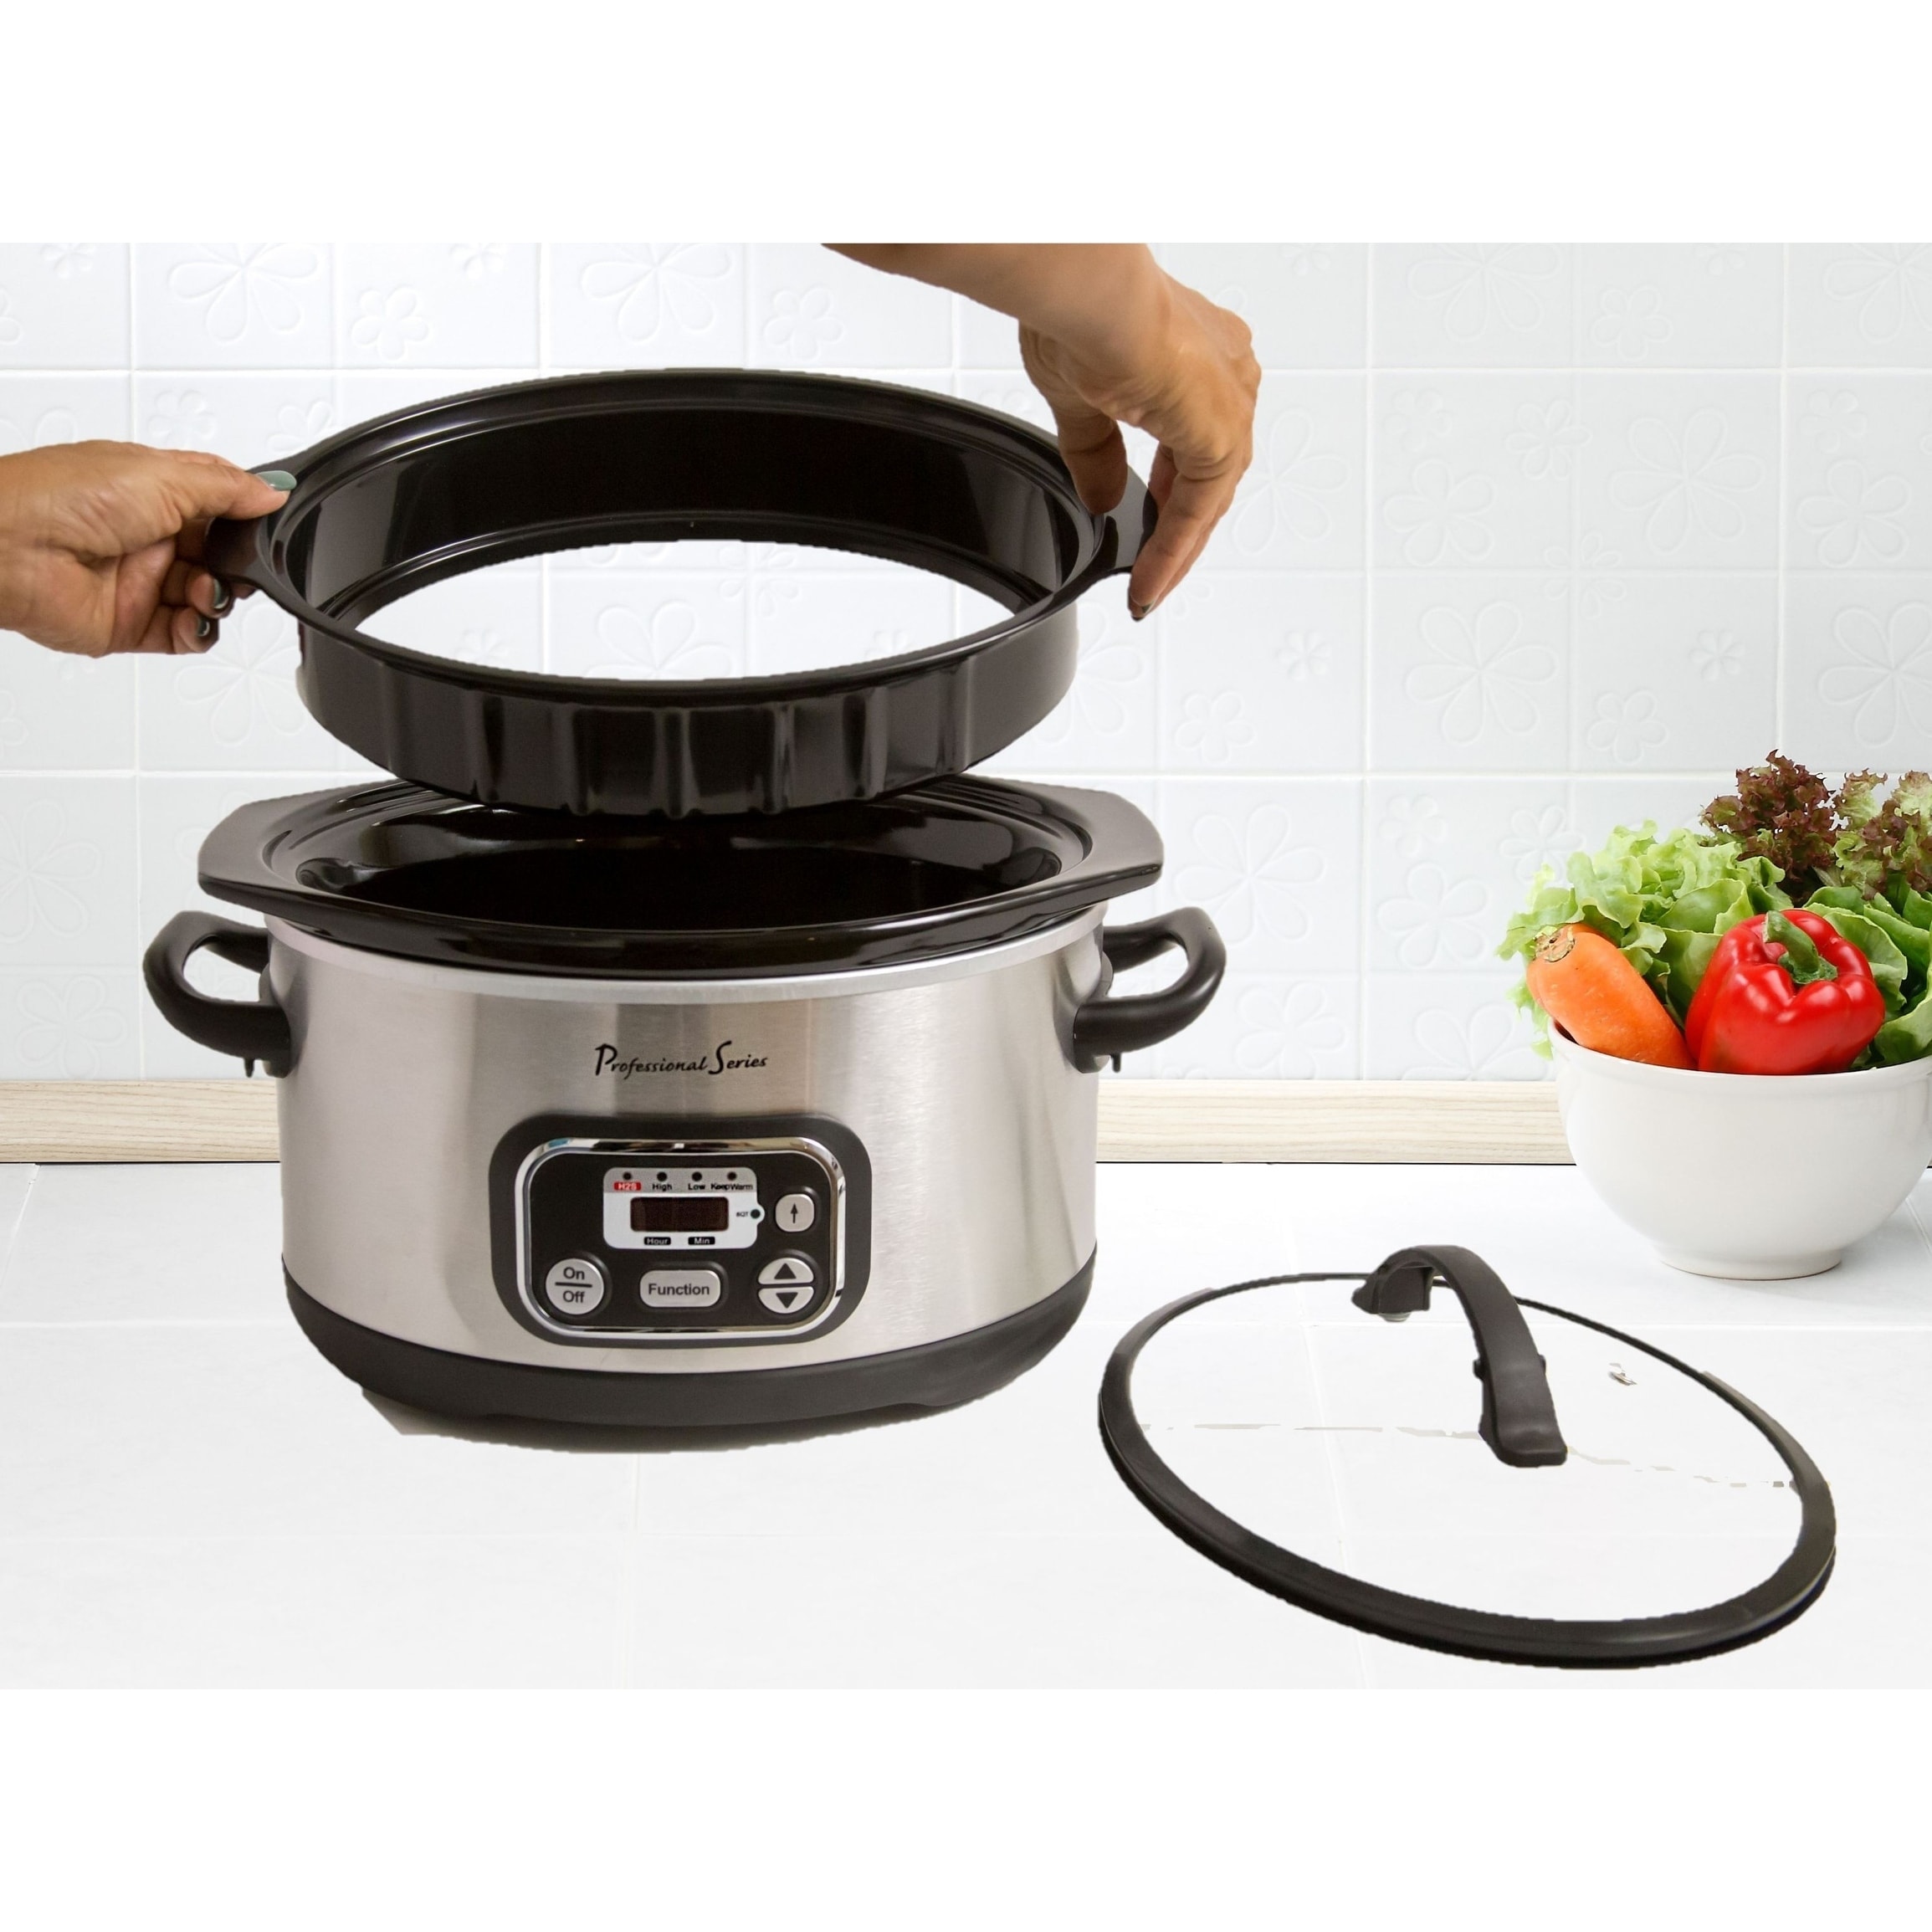 https://ak1.ostkcdn.com/images/products/22544901/Continental-Electric-Pro-Digital-Slow-Cooker-4-6-Quart-Stainless-9c488fc6-3f25-4cf5-9403-b61466f9abfe.jpg